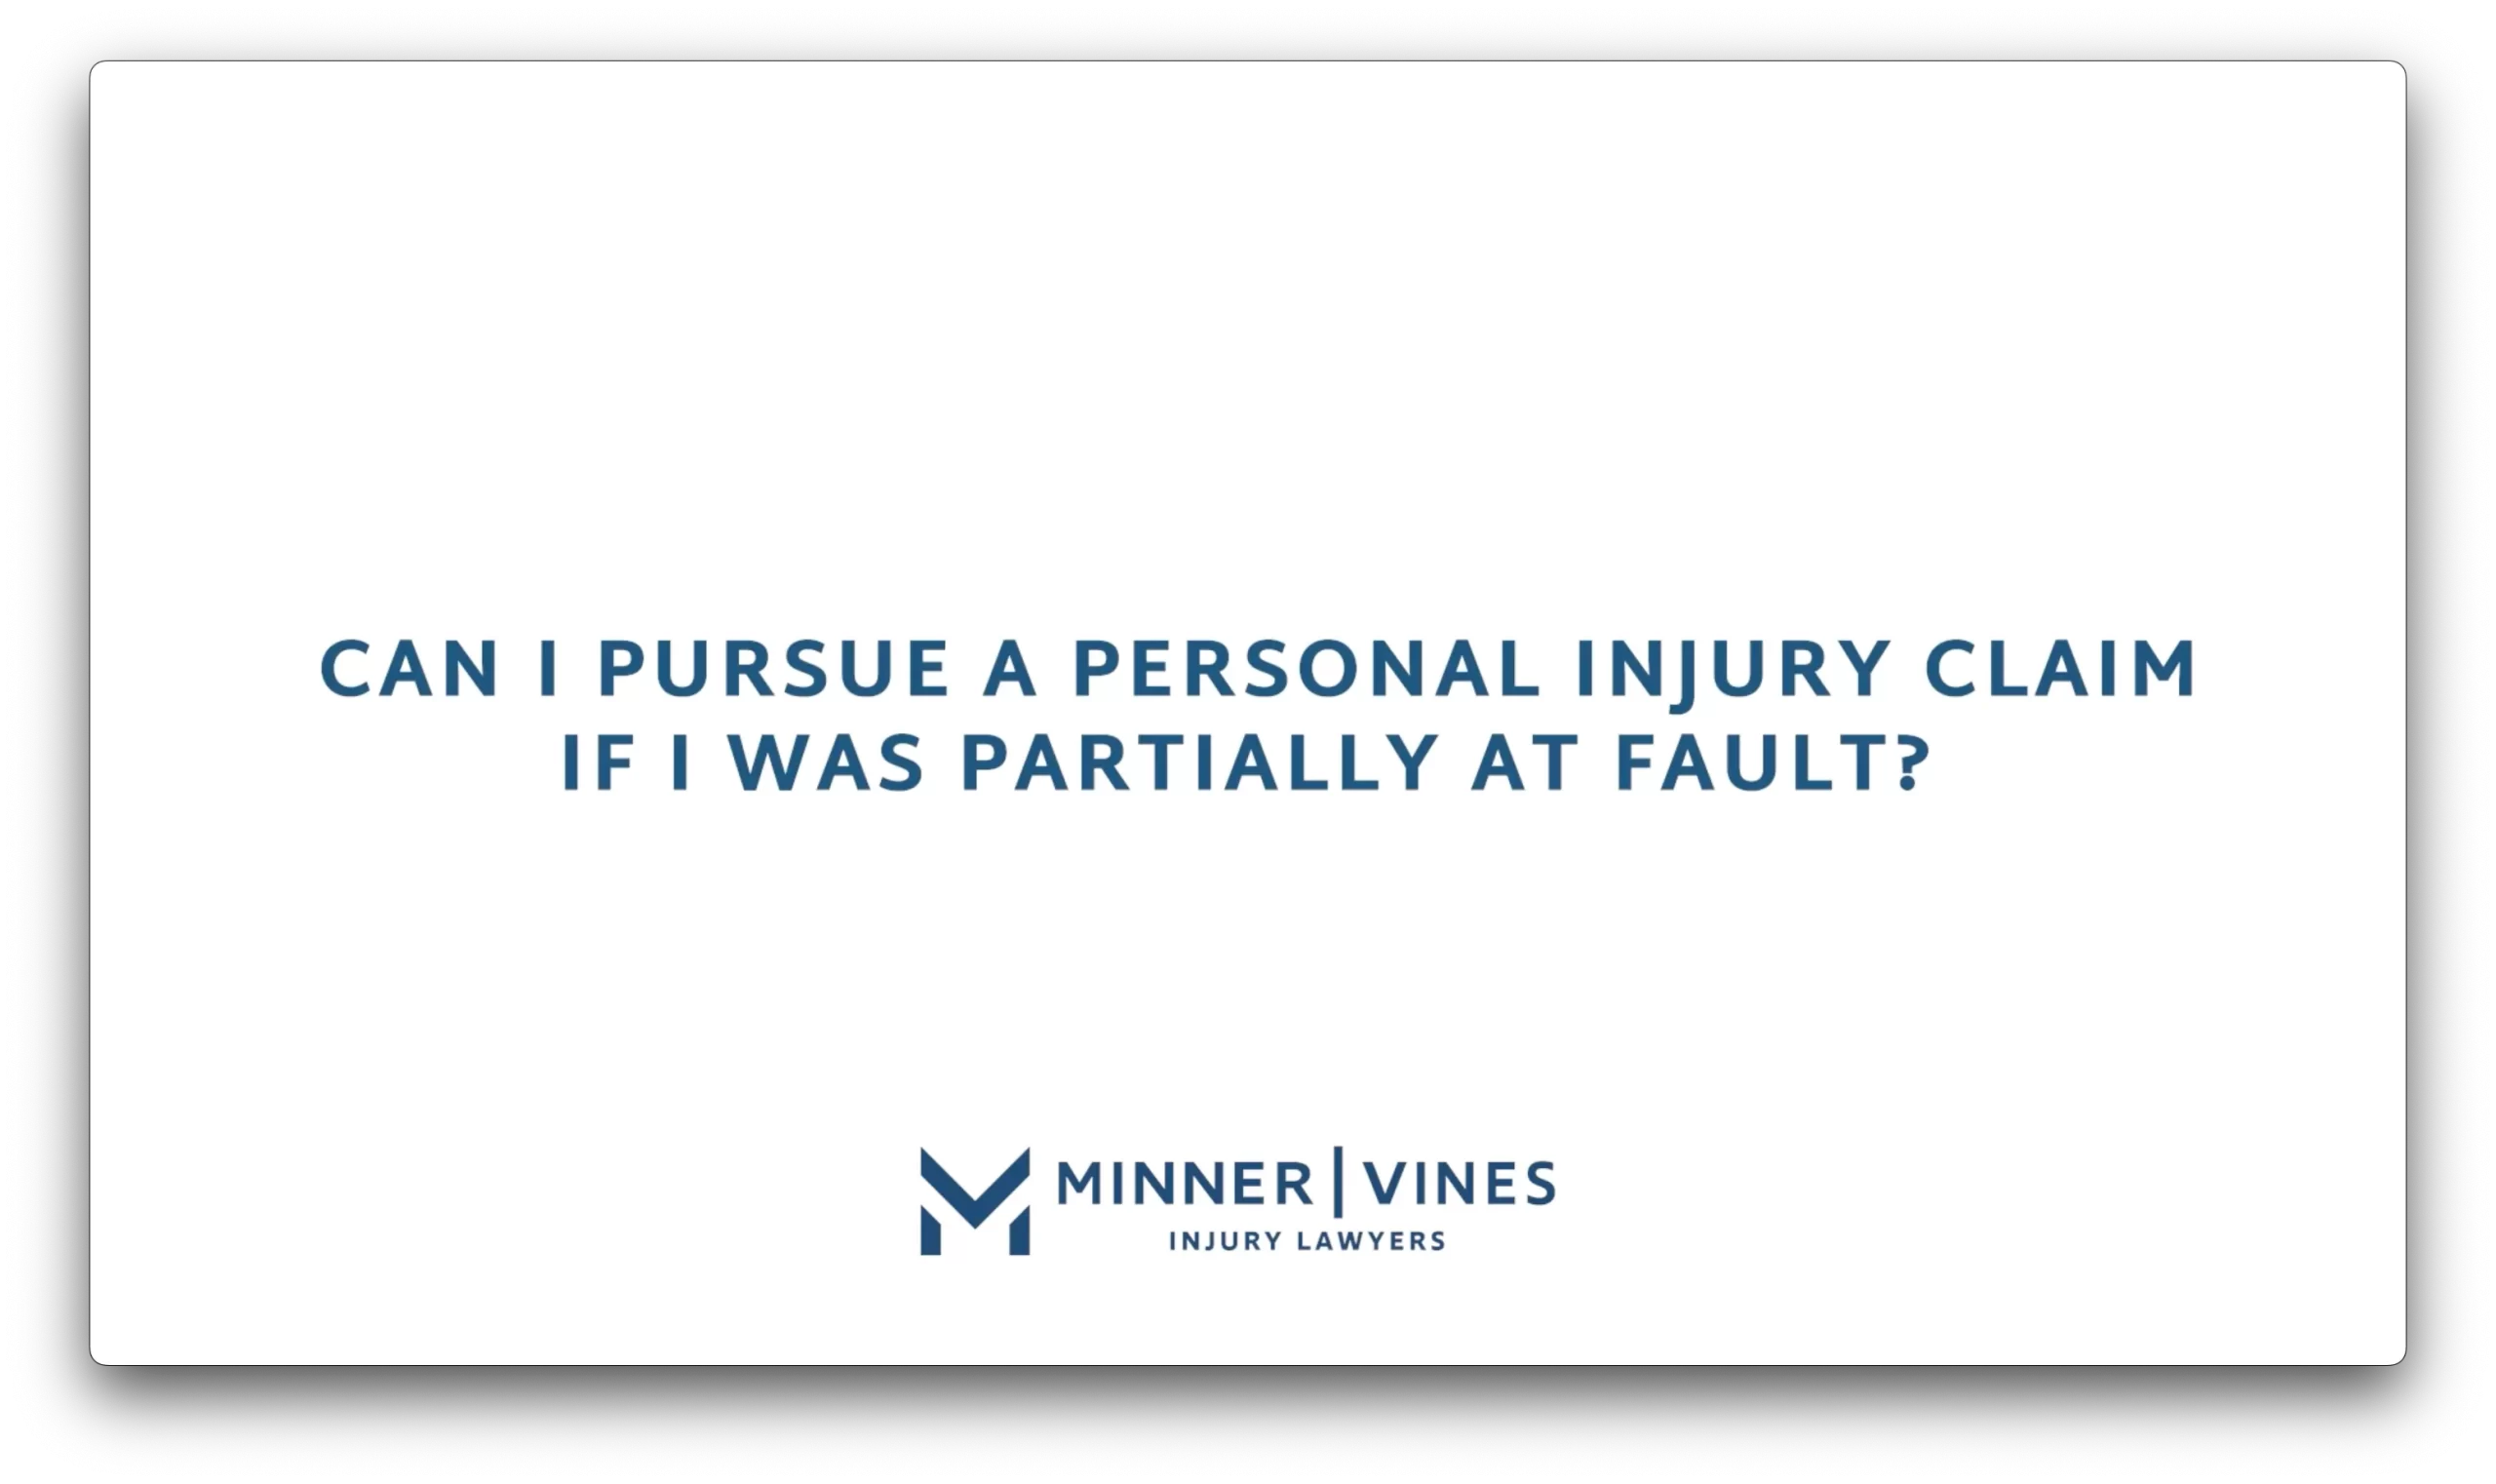 Can I pursue a personal injury claim if I am partially at fault?